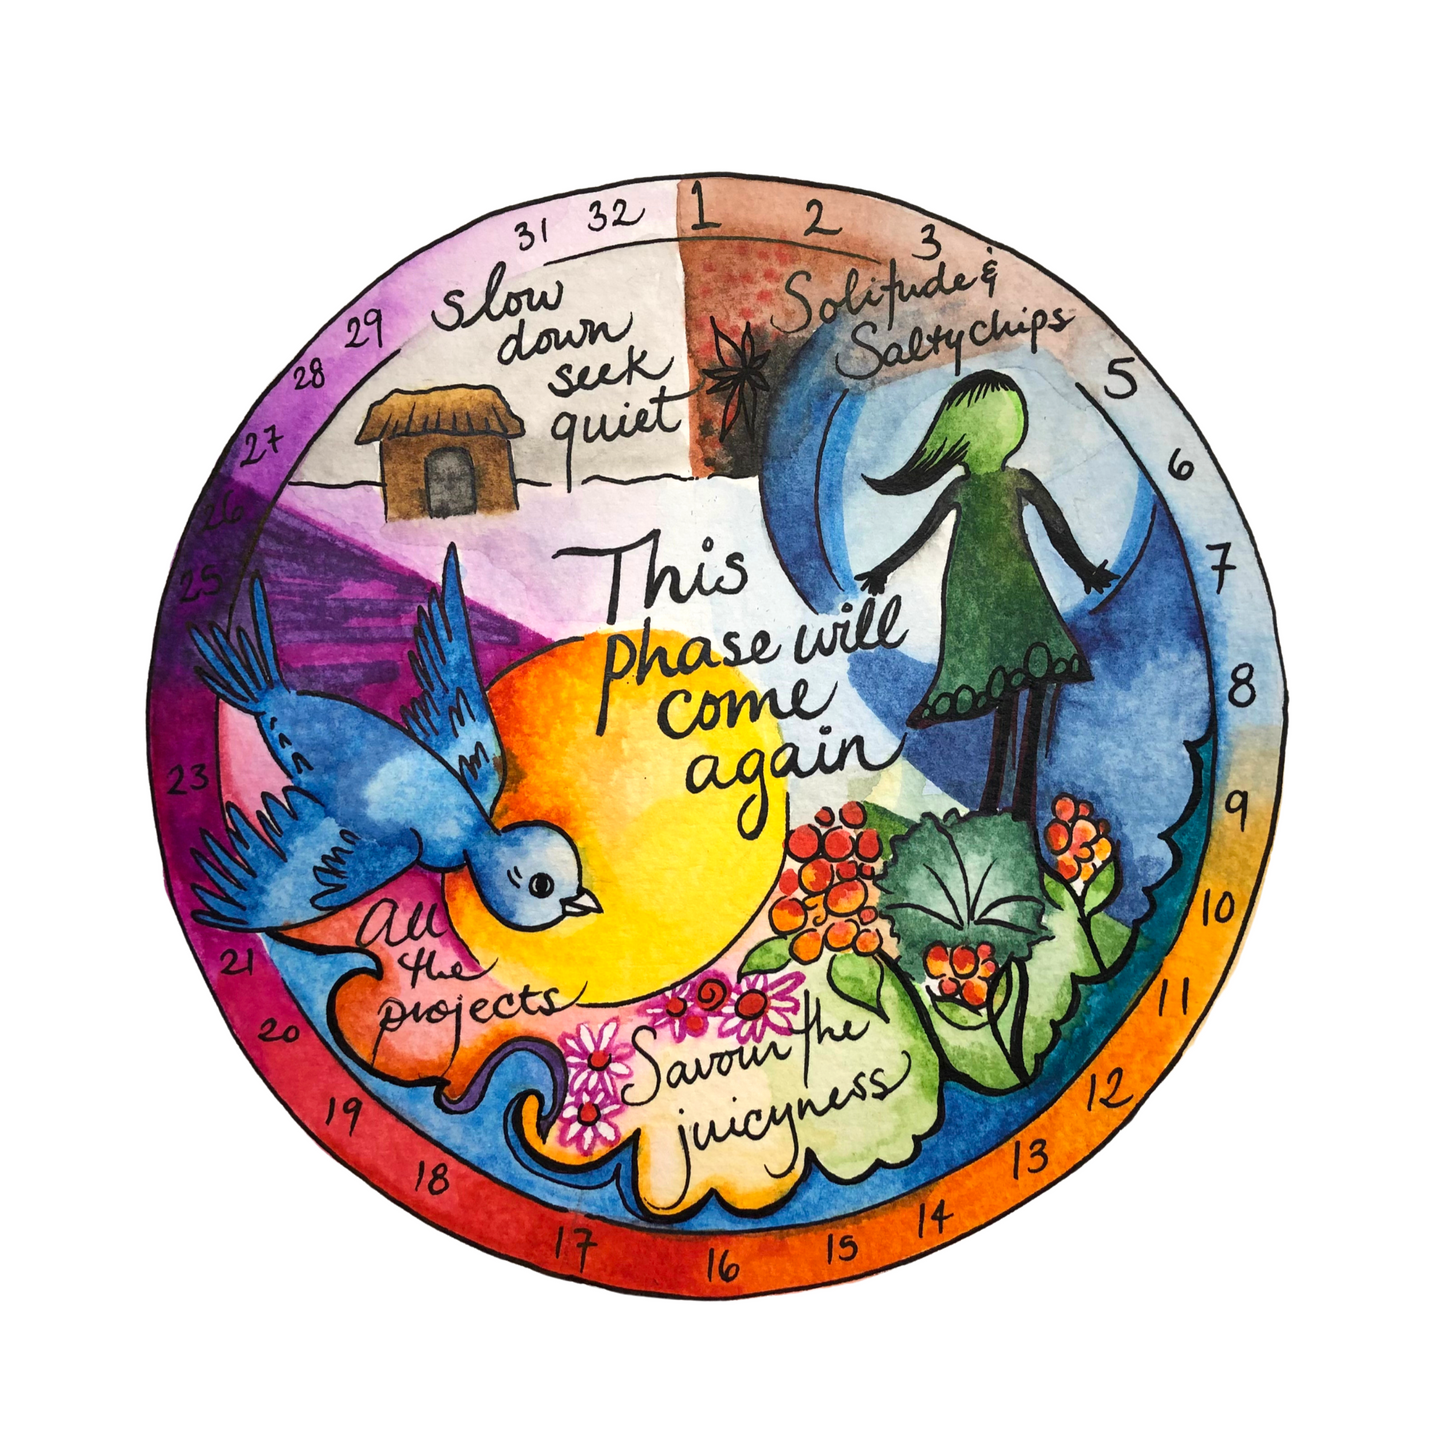 Your Wise Cycle and Consultation: A Custom Illustration